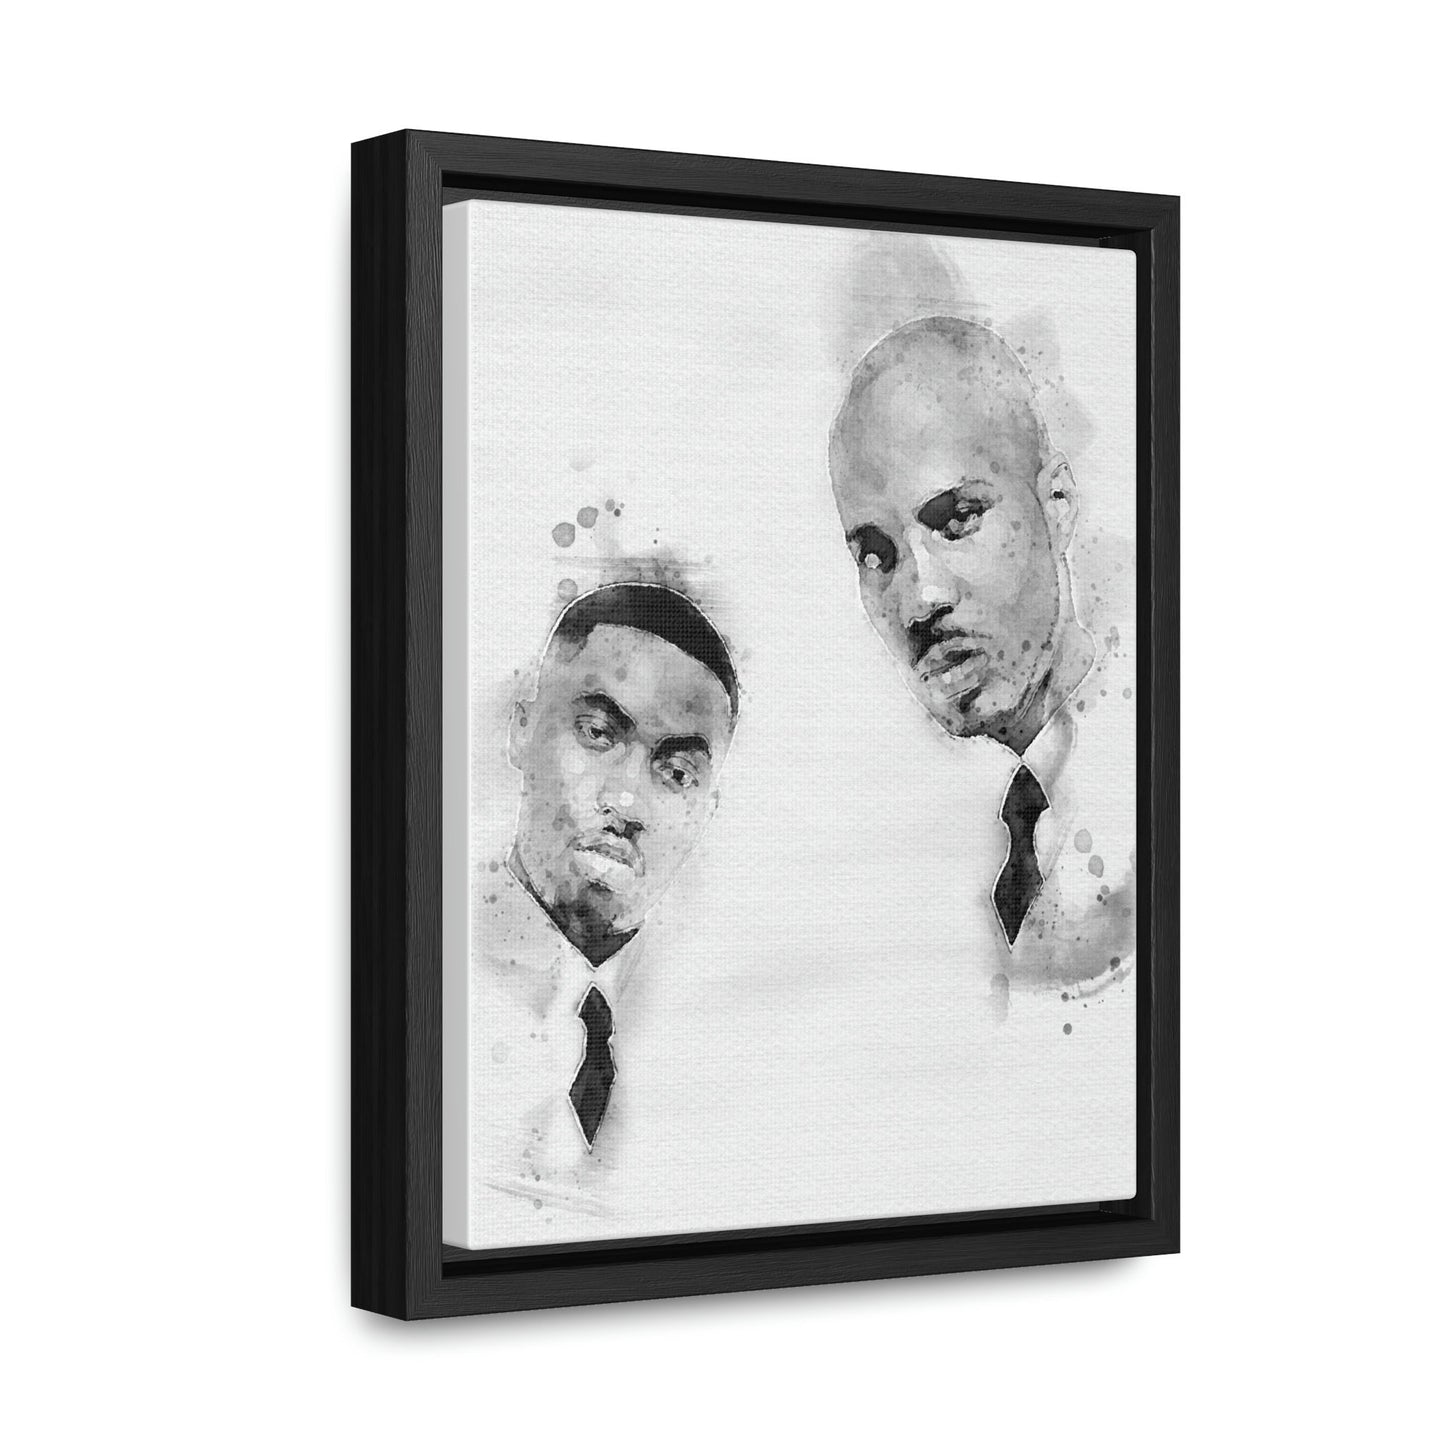 Belly Movie Poster, DMX and Nas poster, Hood Movies, DMX Poster, Nas Poster, Wall Art